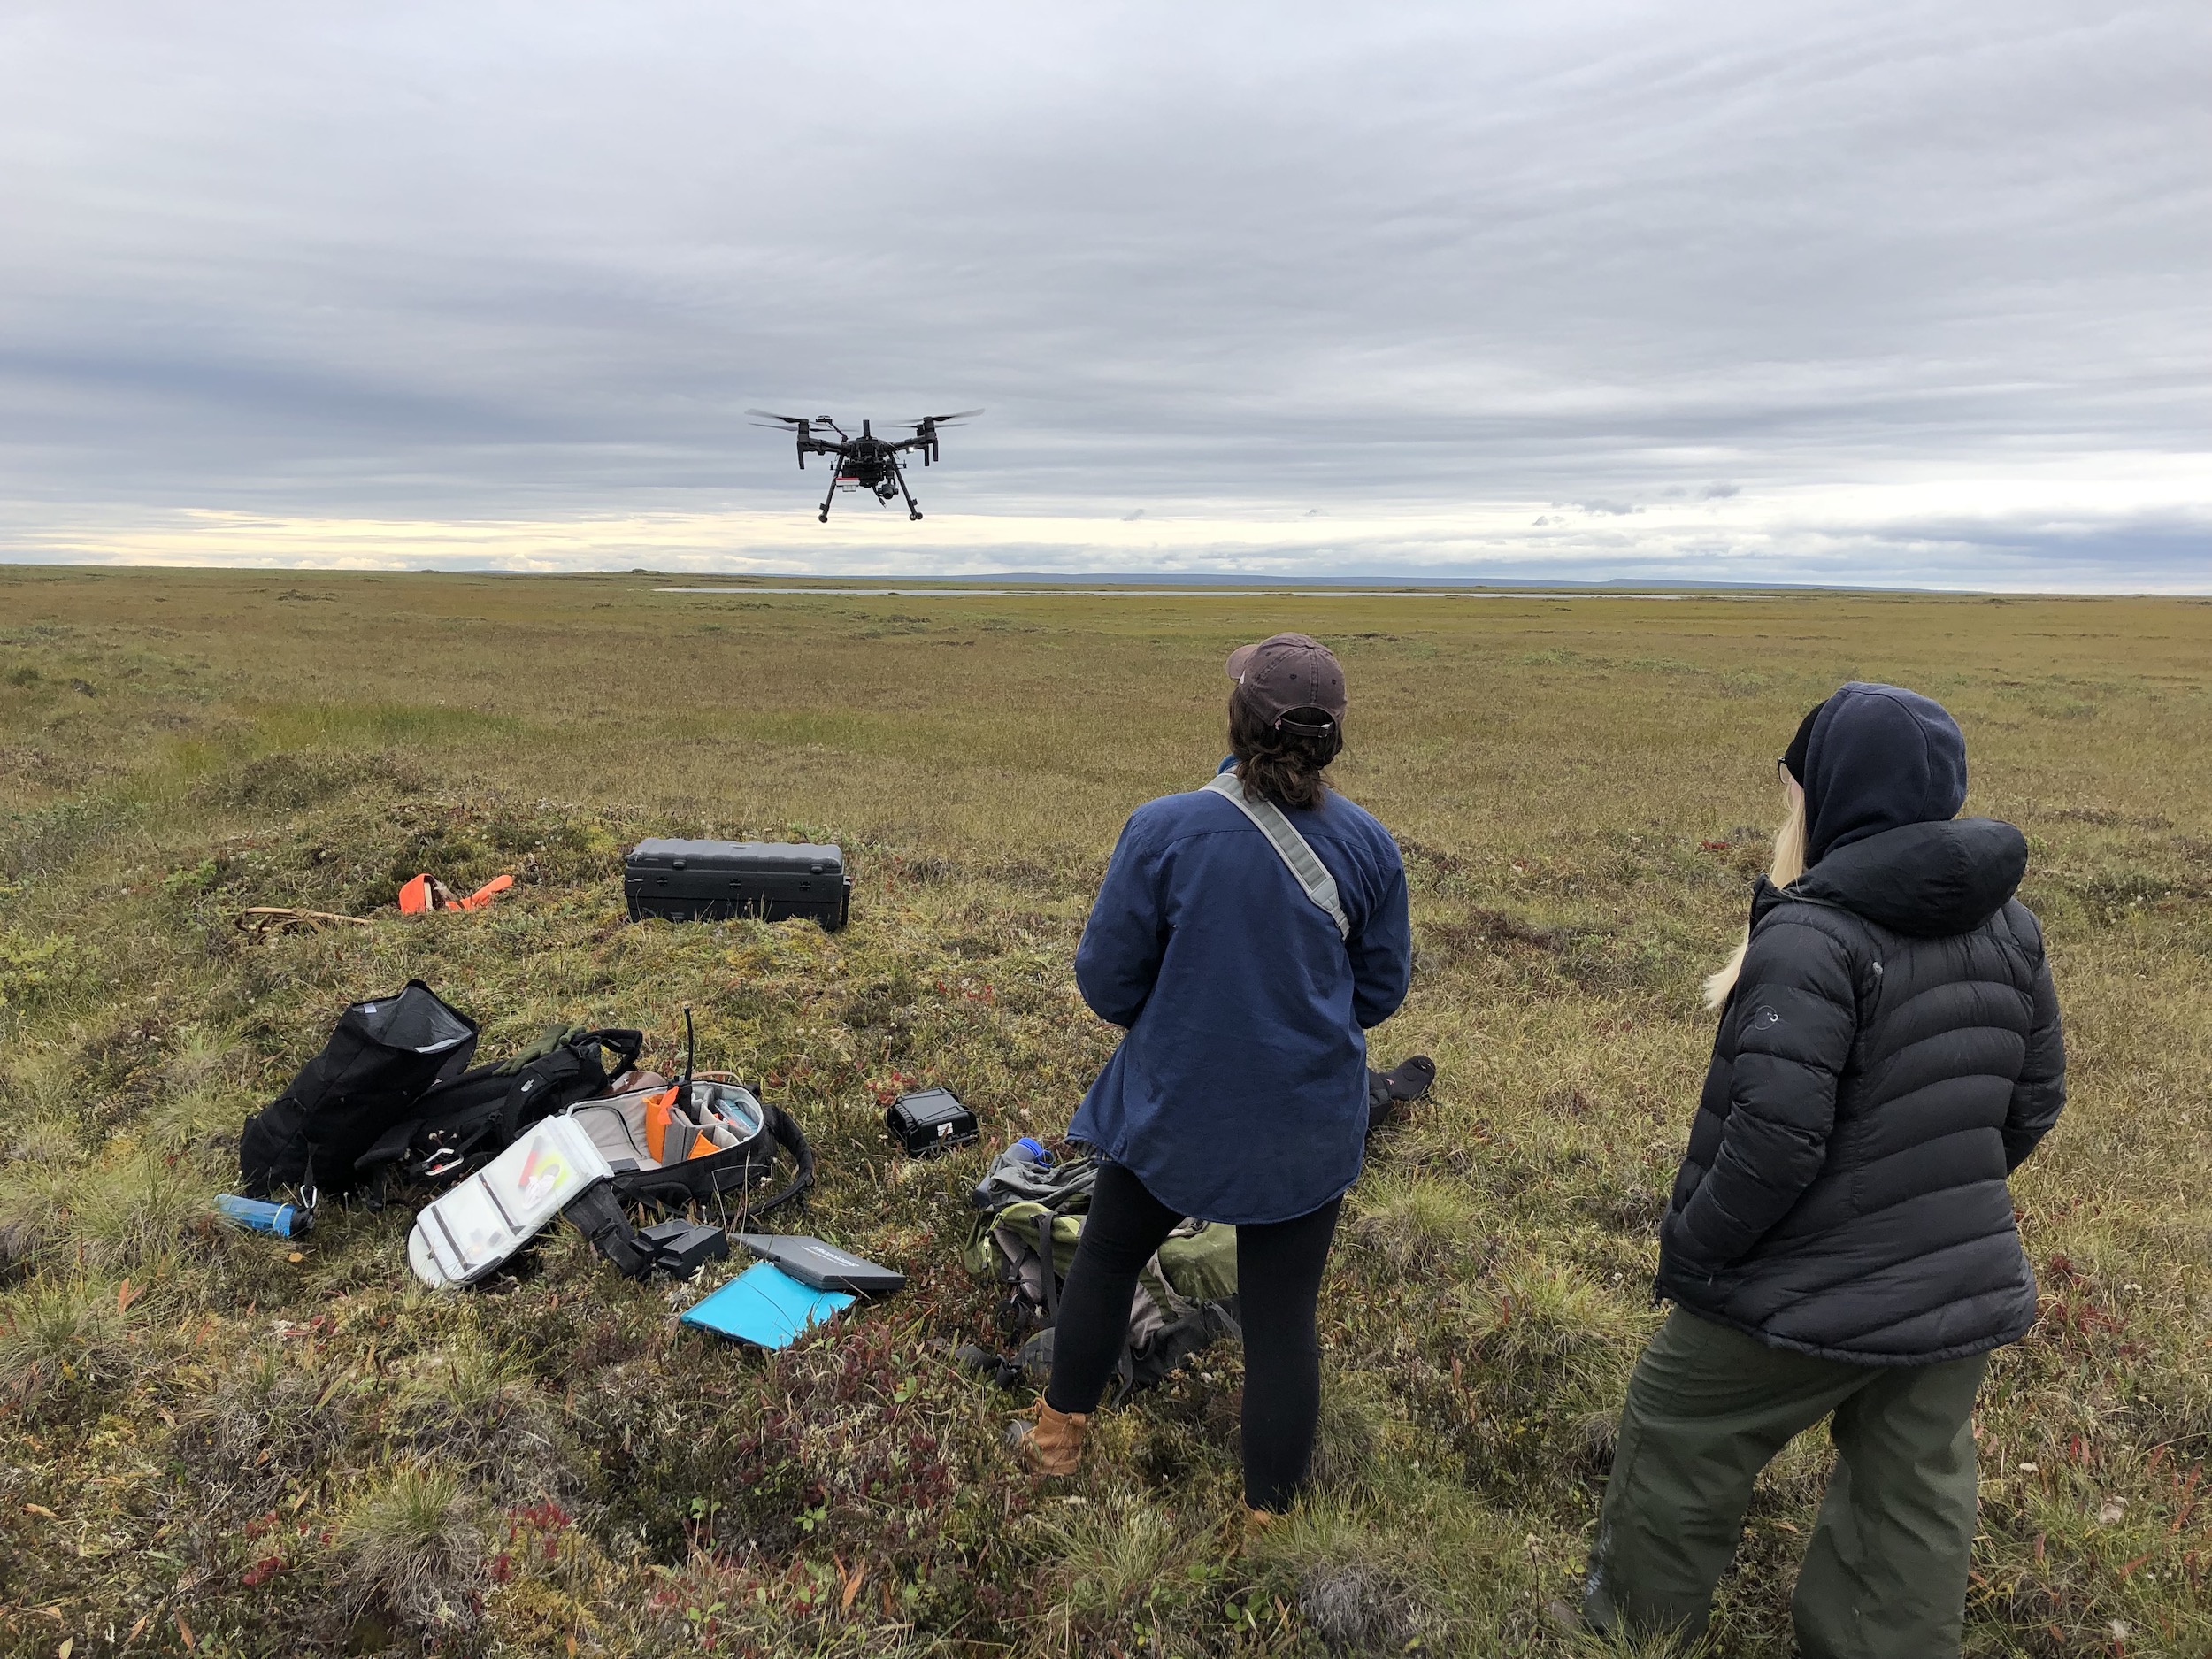 Two women monitor a research-grade drone about 10 feet over the green tundra on a cloudy summer day. The woman on the left controls the drone while the other supervises.